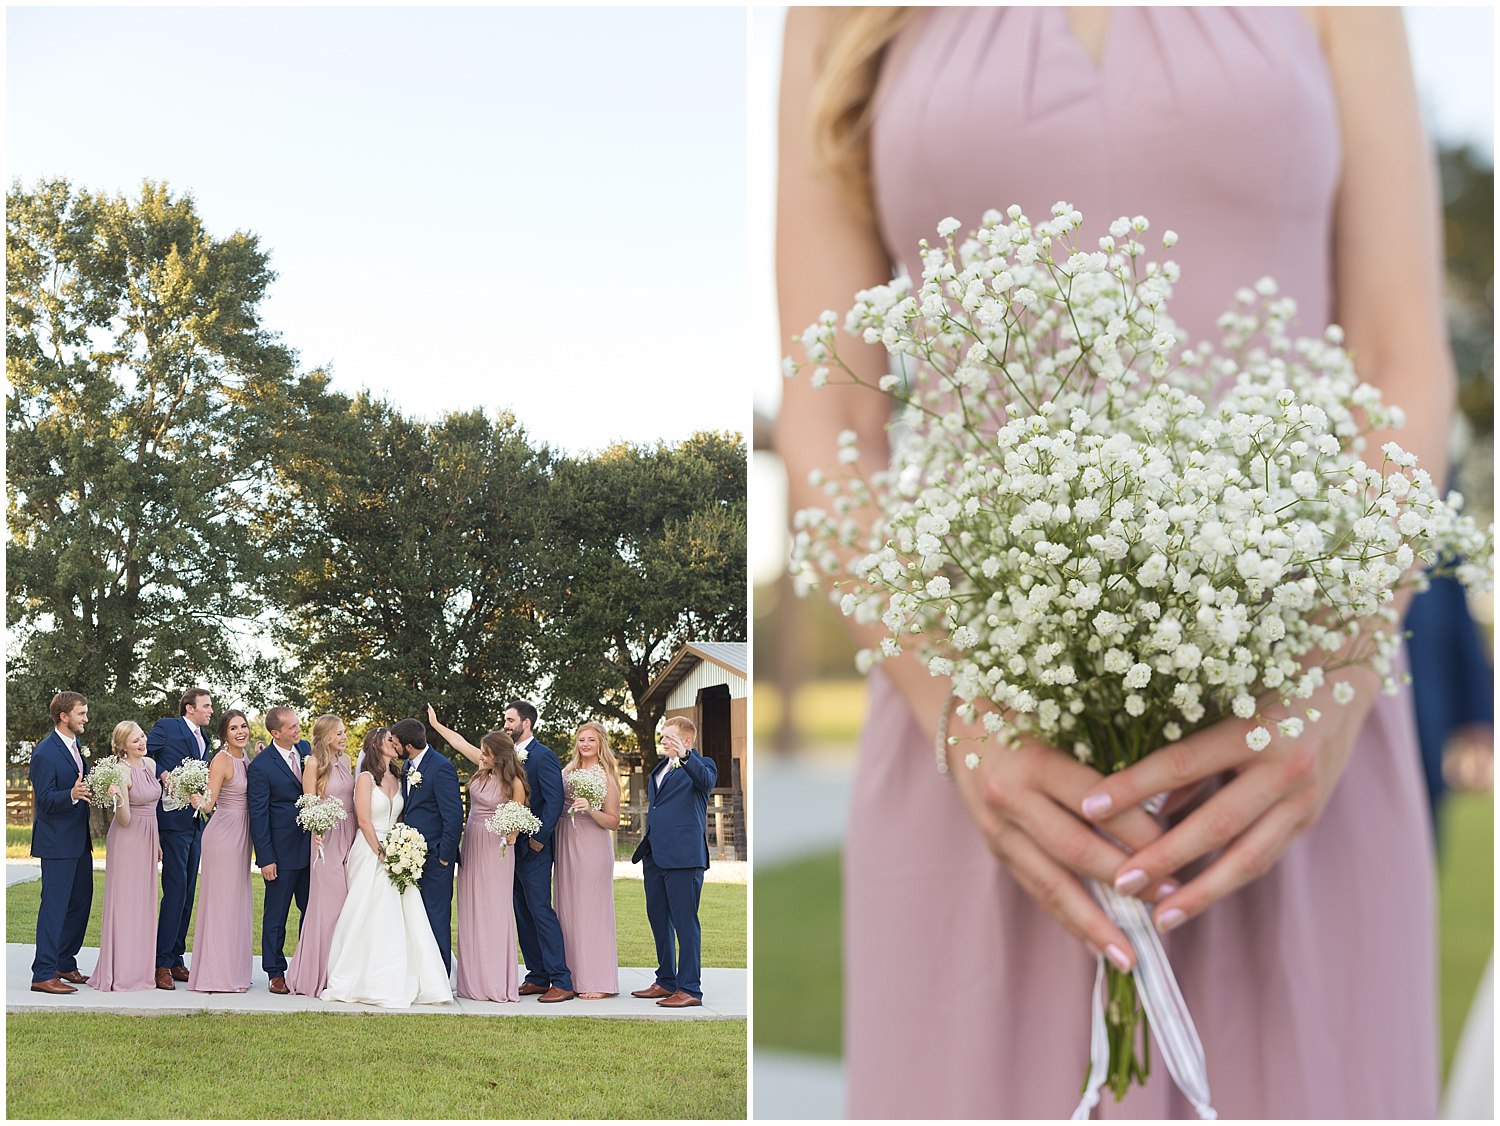 rose bridesmaid dress with baby's breath bouquet - South MS wedding photographer